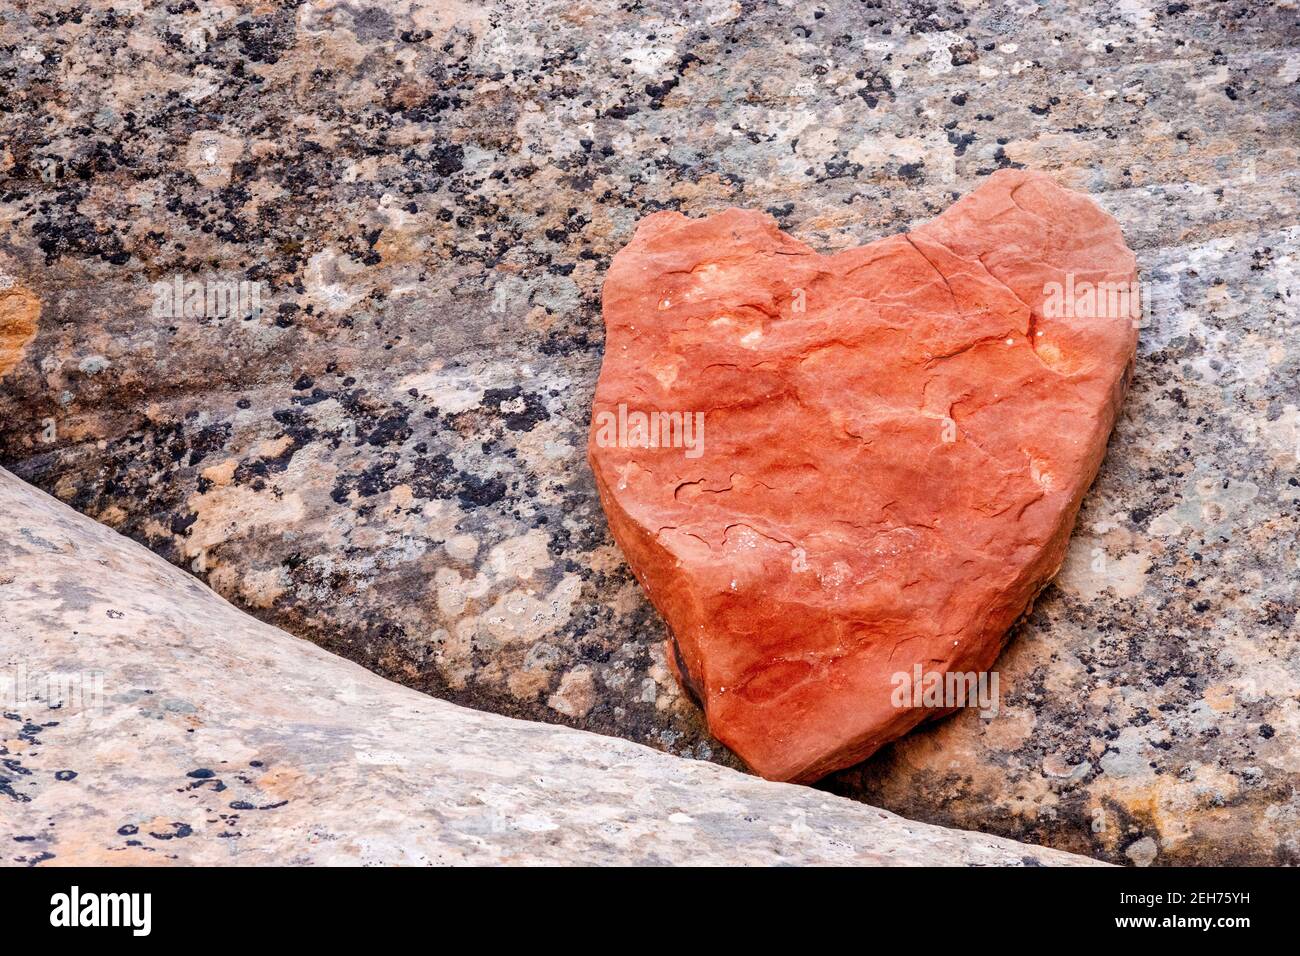 Red heart shape rock laying on granite rock. Valentine card appropriate. Stock Photo